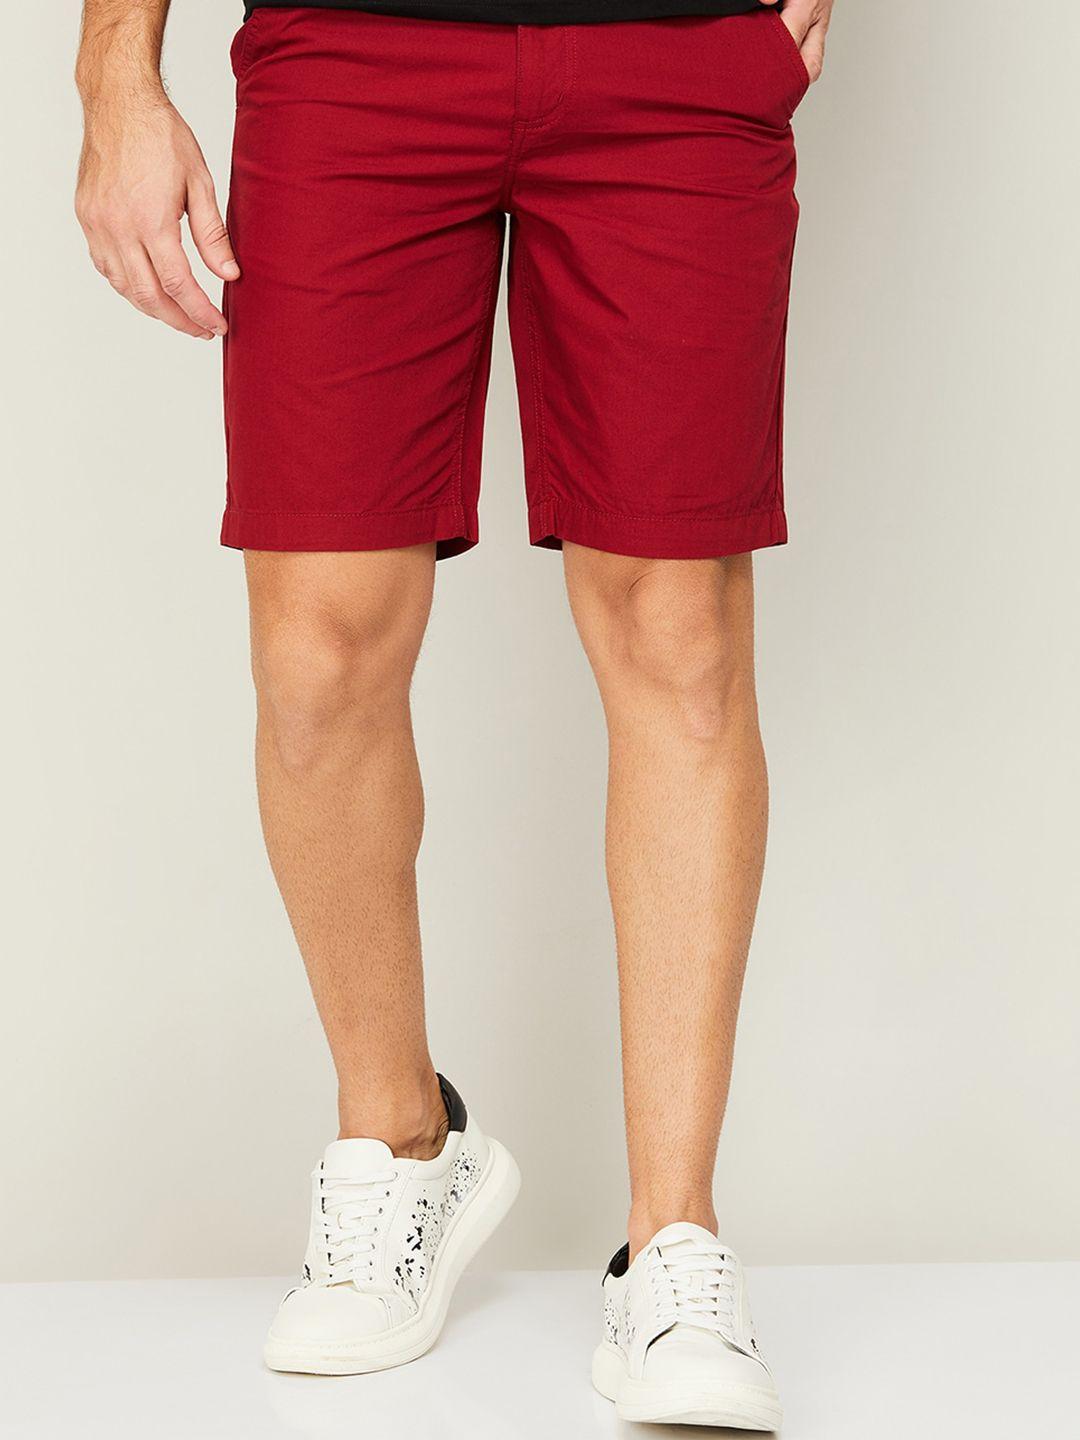 fame-forever-by-lifestyle-men-mid-rise-cotton-chino-shorts